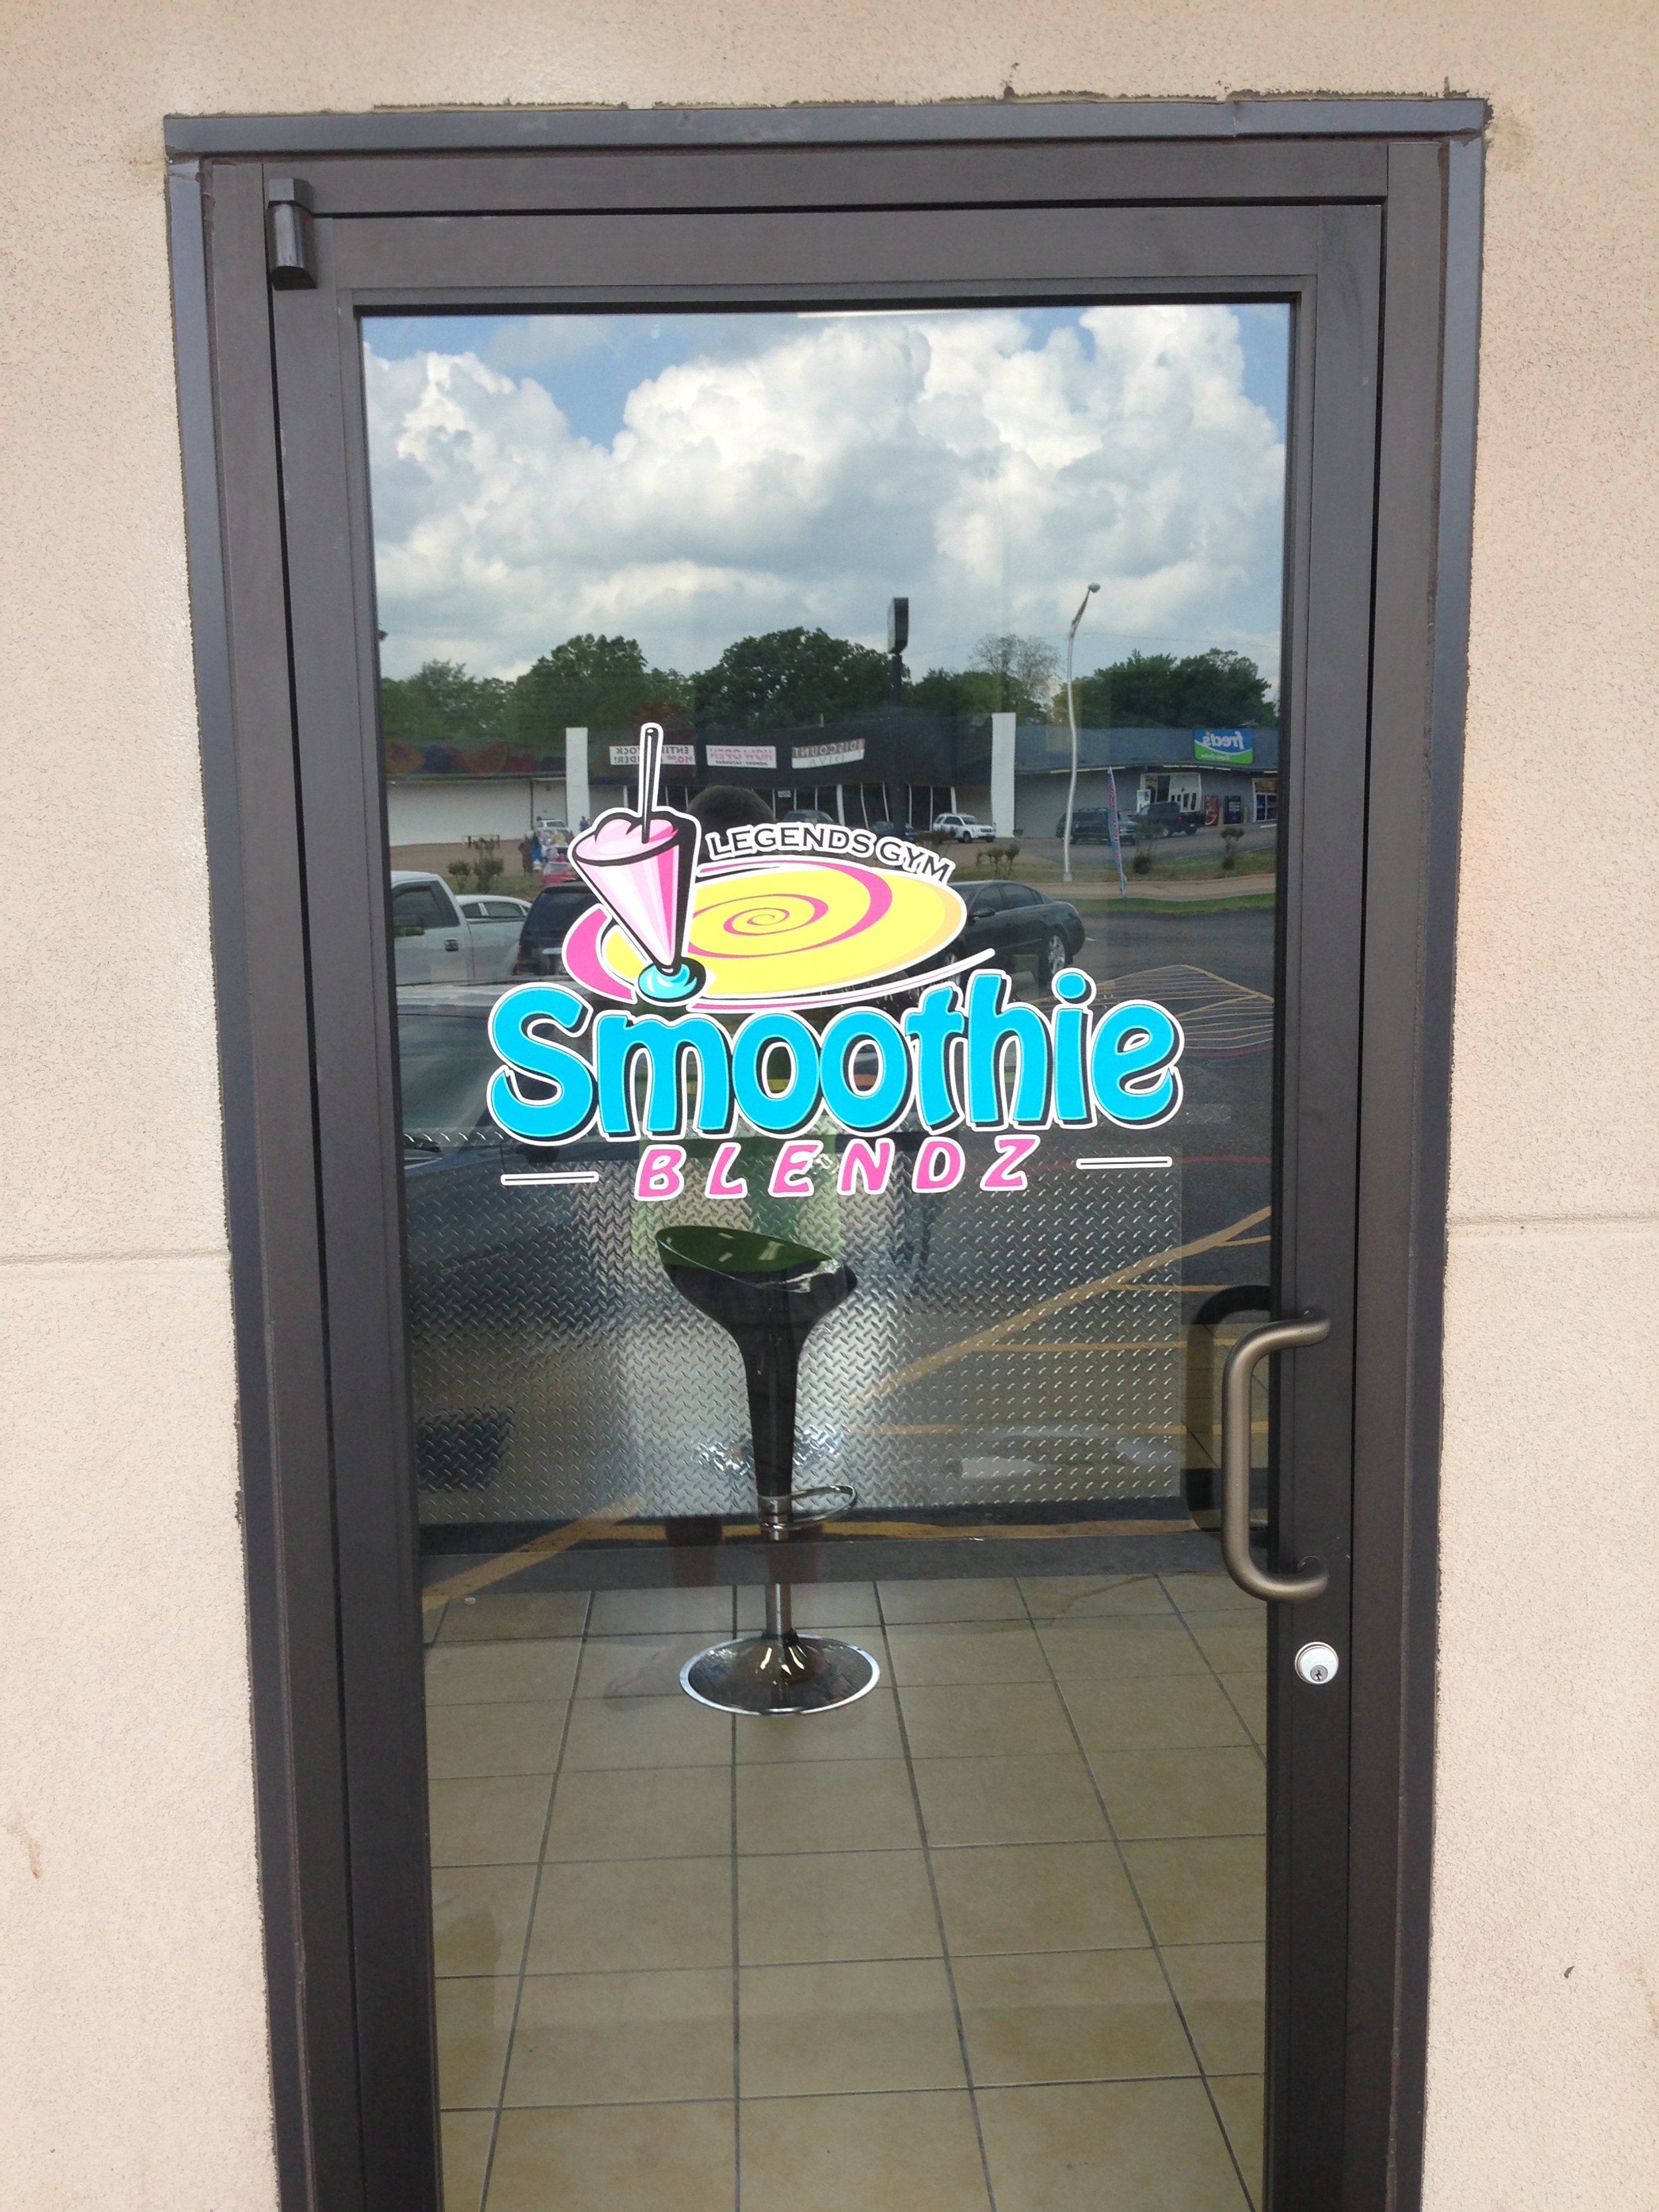 legends smoothies decal.JPG